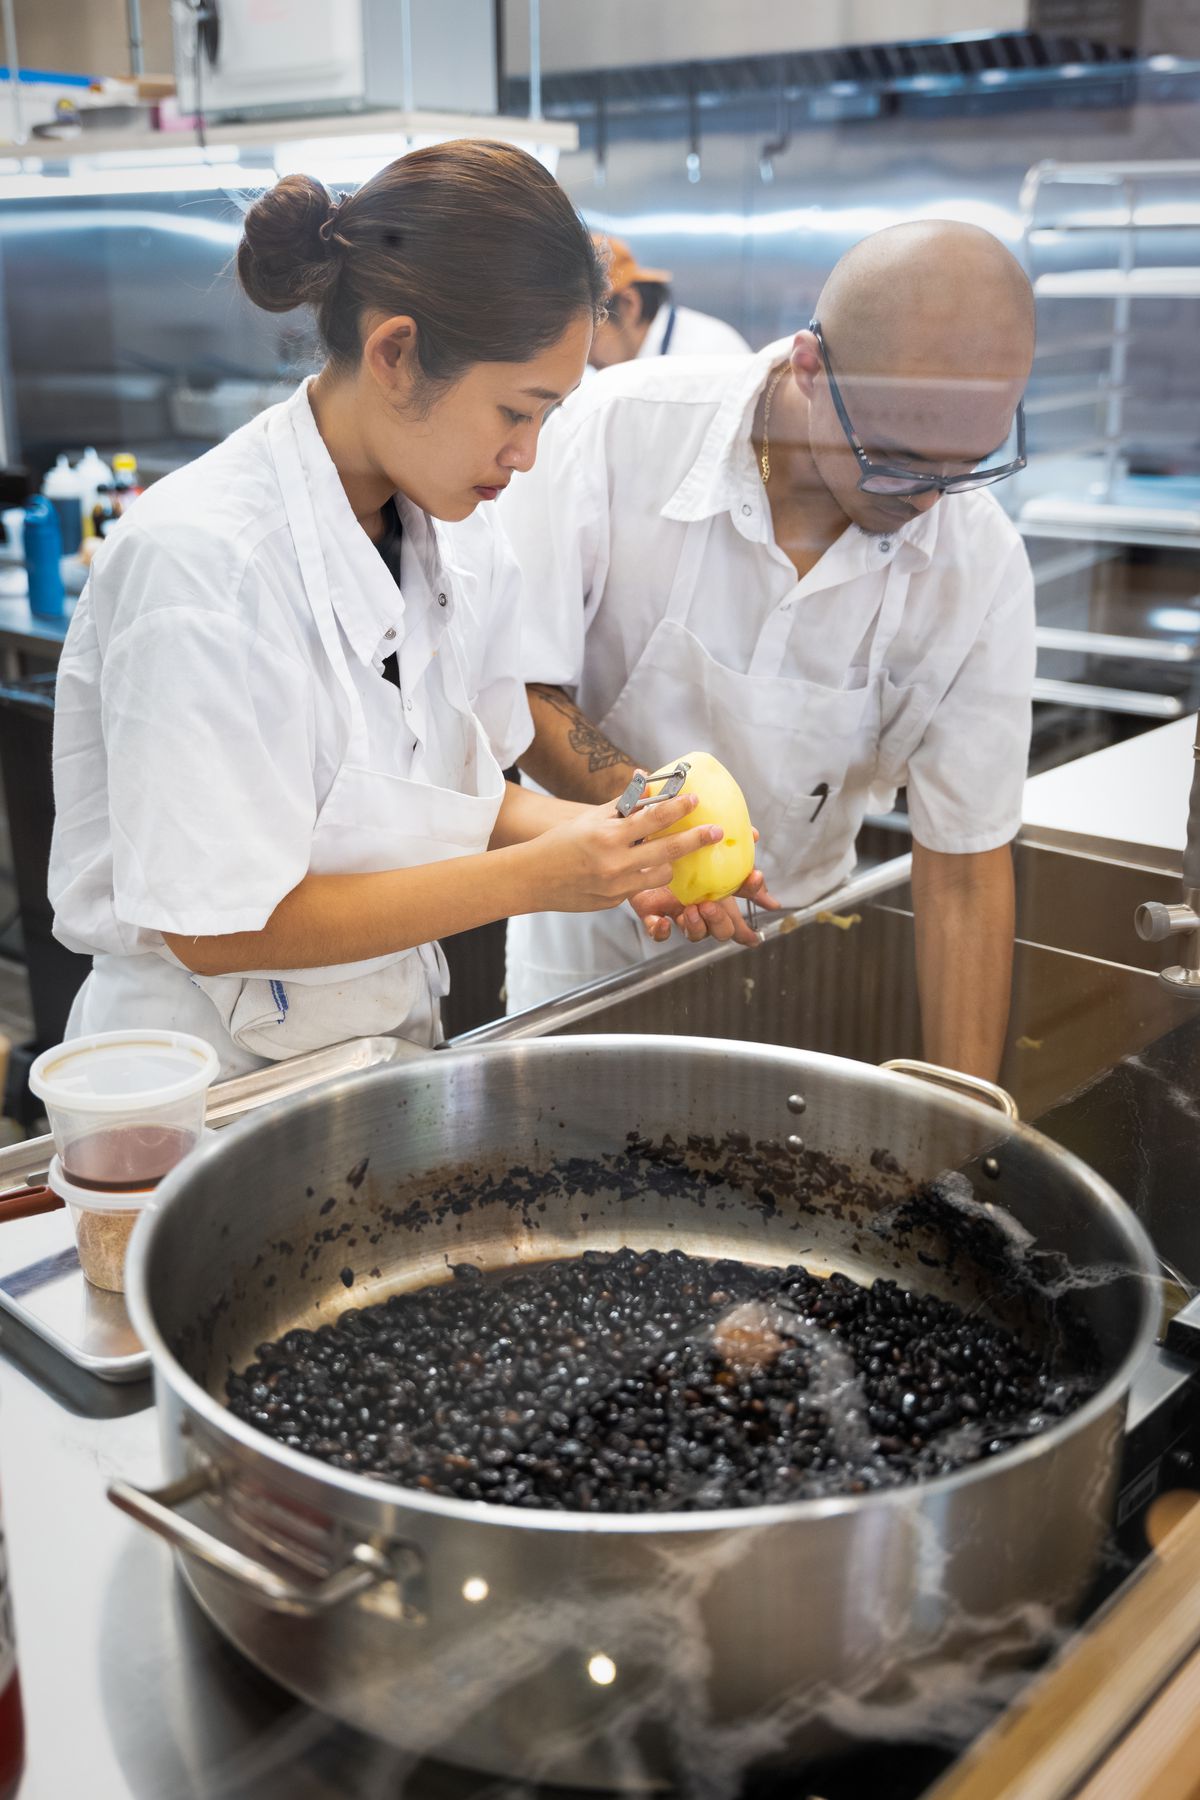 Cooks hover over a pot of black beans.